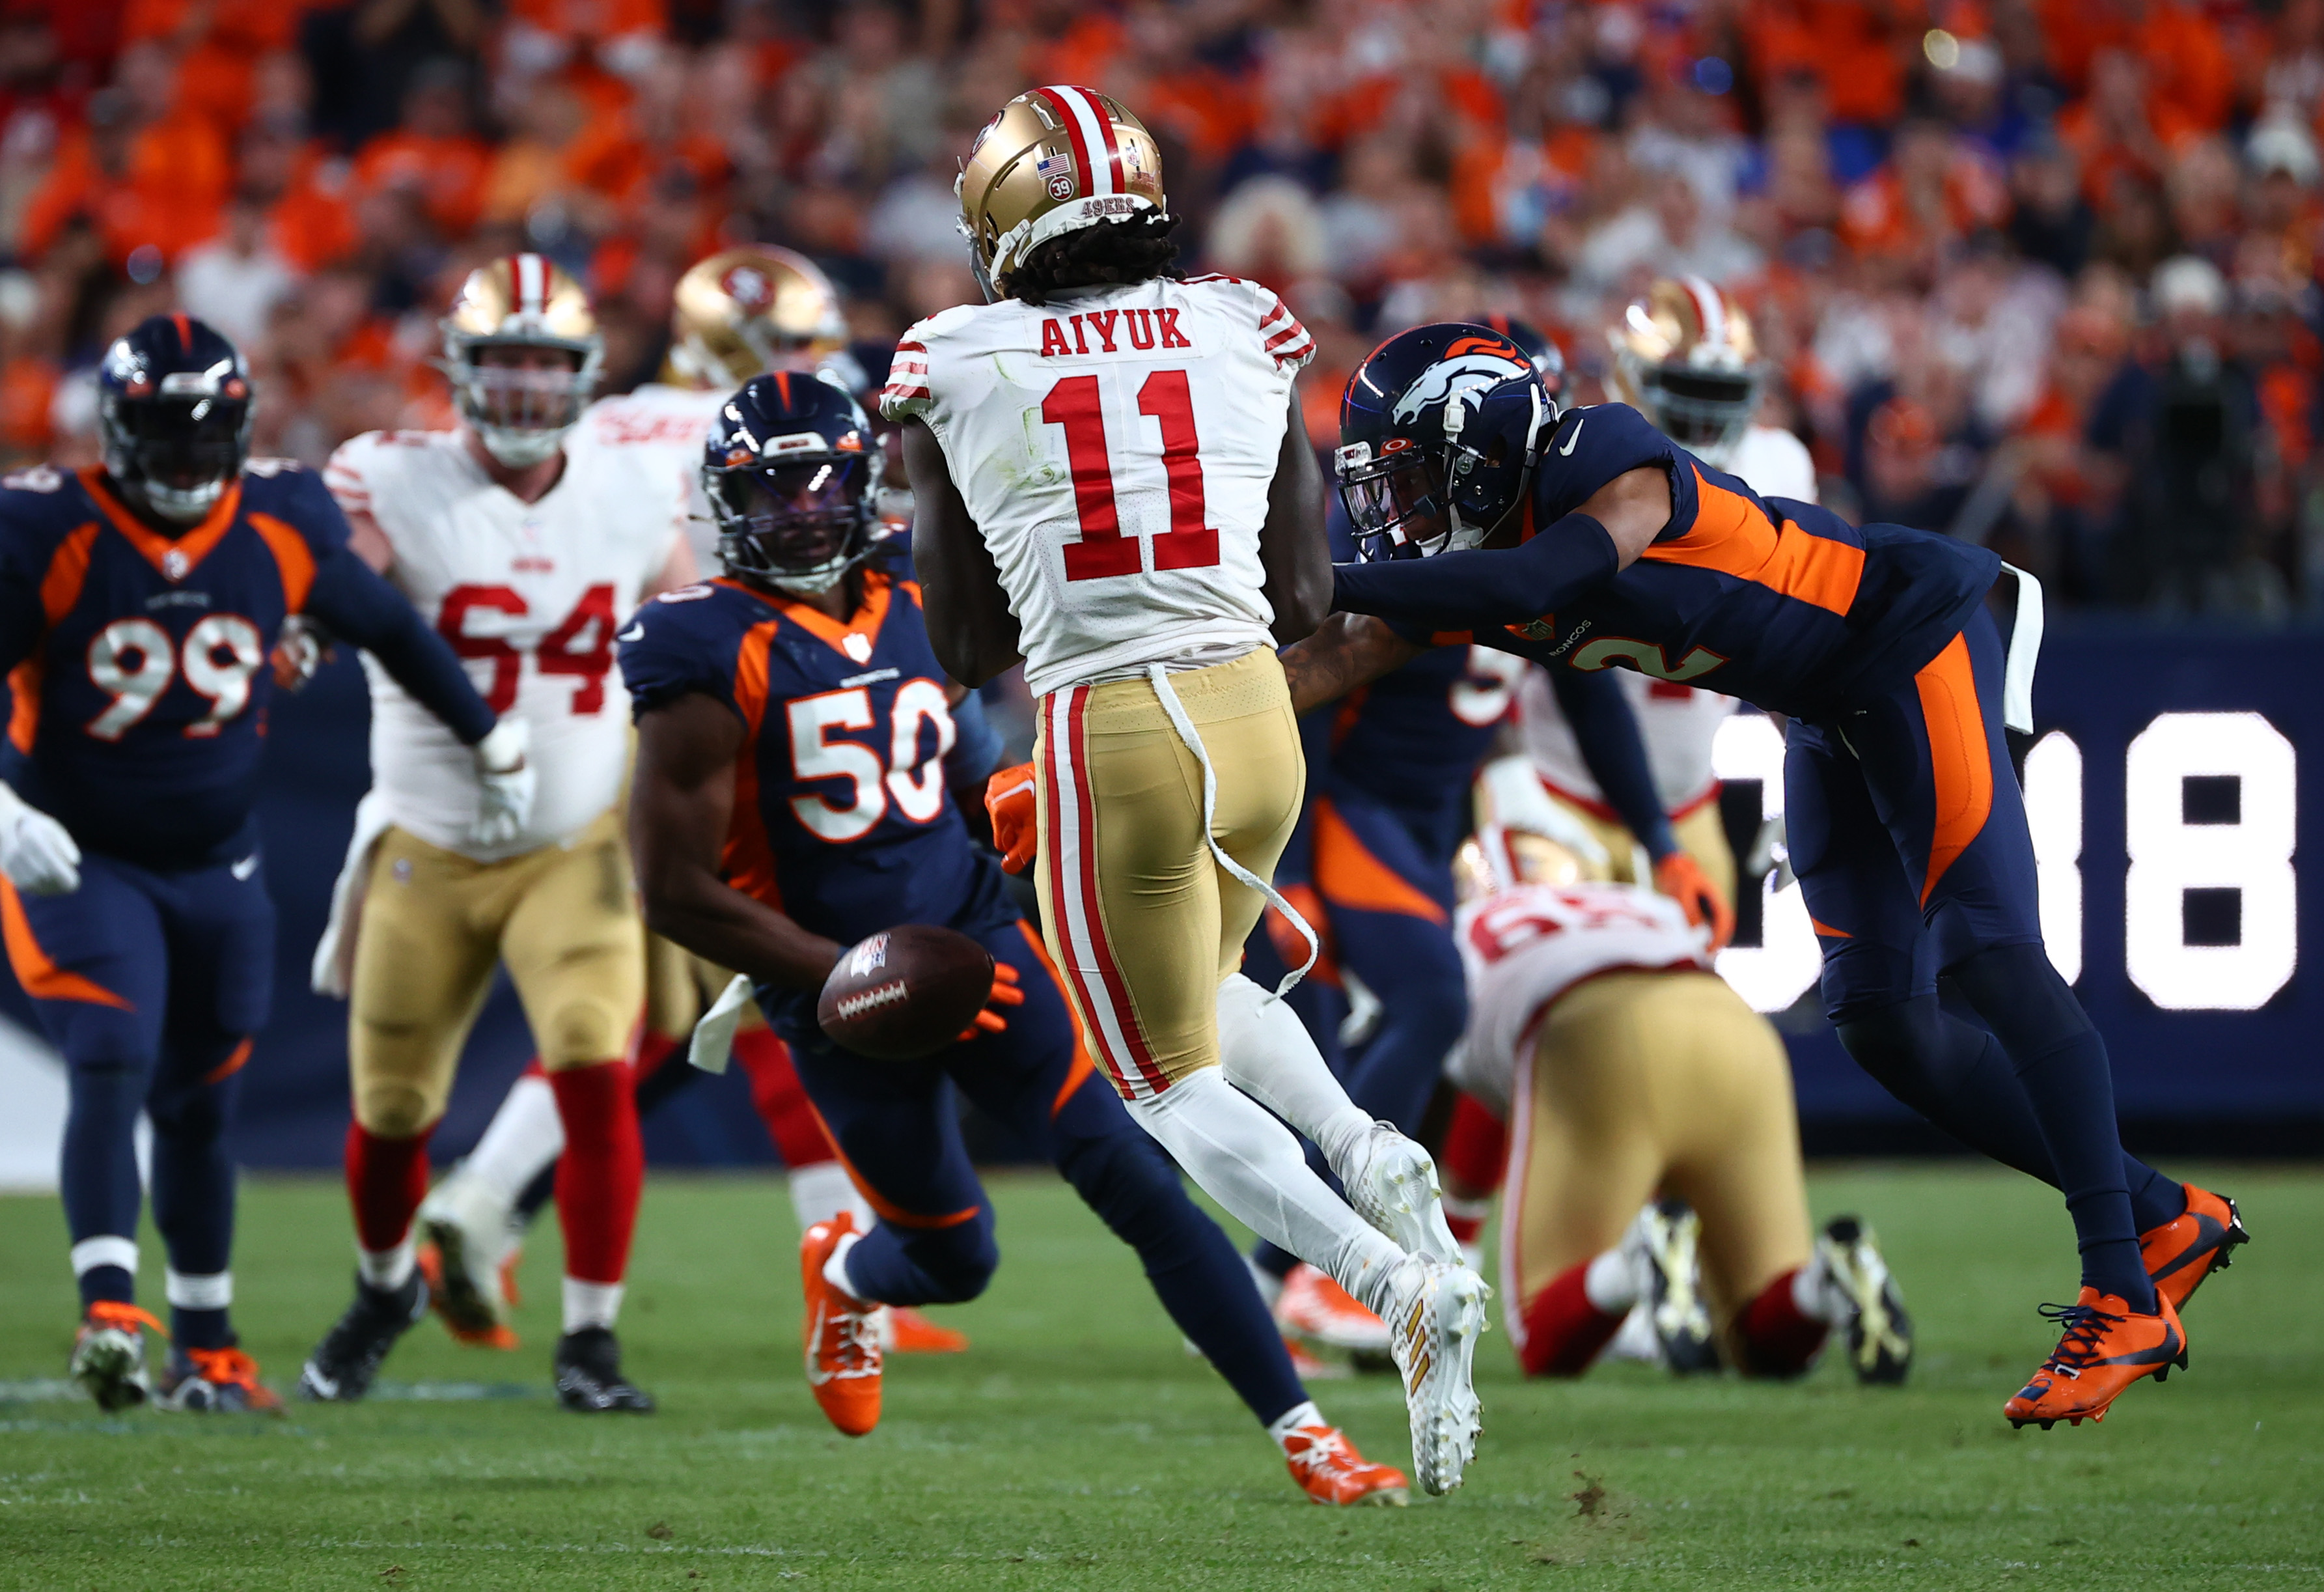 Pat Surtain II #2 of the Denver Broncos punches the ball away from Brandon Aiyuk #11 of the San Francisco 49ers during the first half of a game at Empower Field At Mile High on September 25, 2022 in Denver, Colorado.